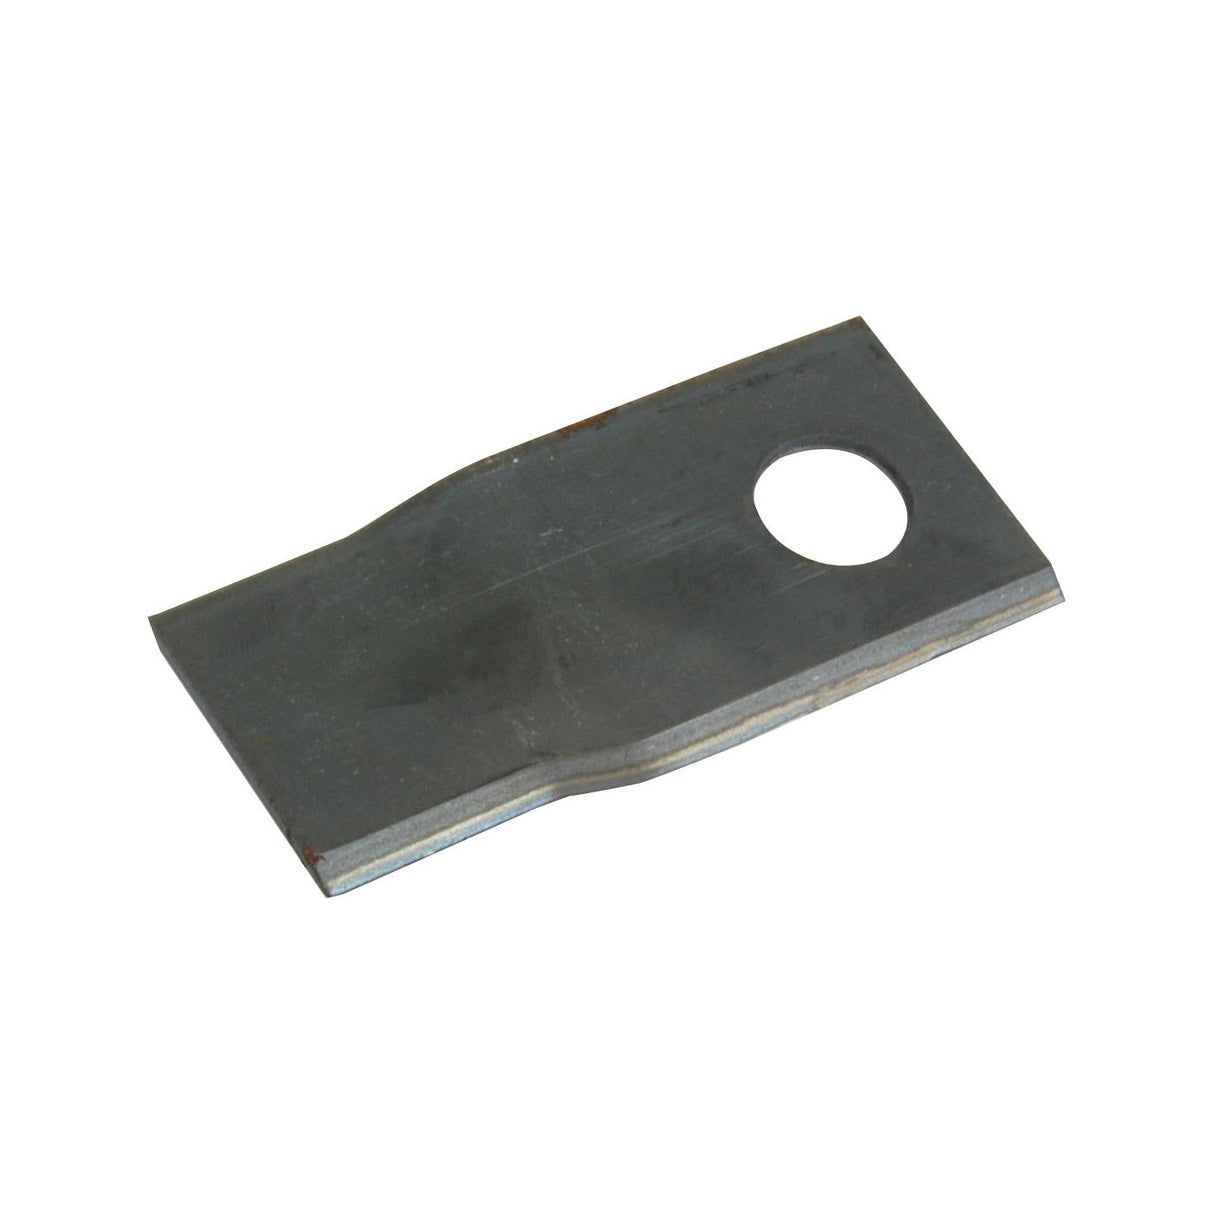 Mower Blade - Twisted blade, bottom edge sharp & parallel -  100 x 48x3mm - Hole⌀19mm  - RH -  Replacement for Claas, Pottinger
 - S.78169 - Farming Parts